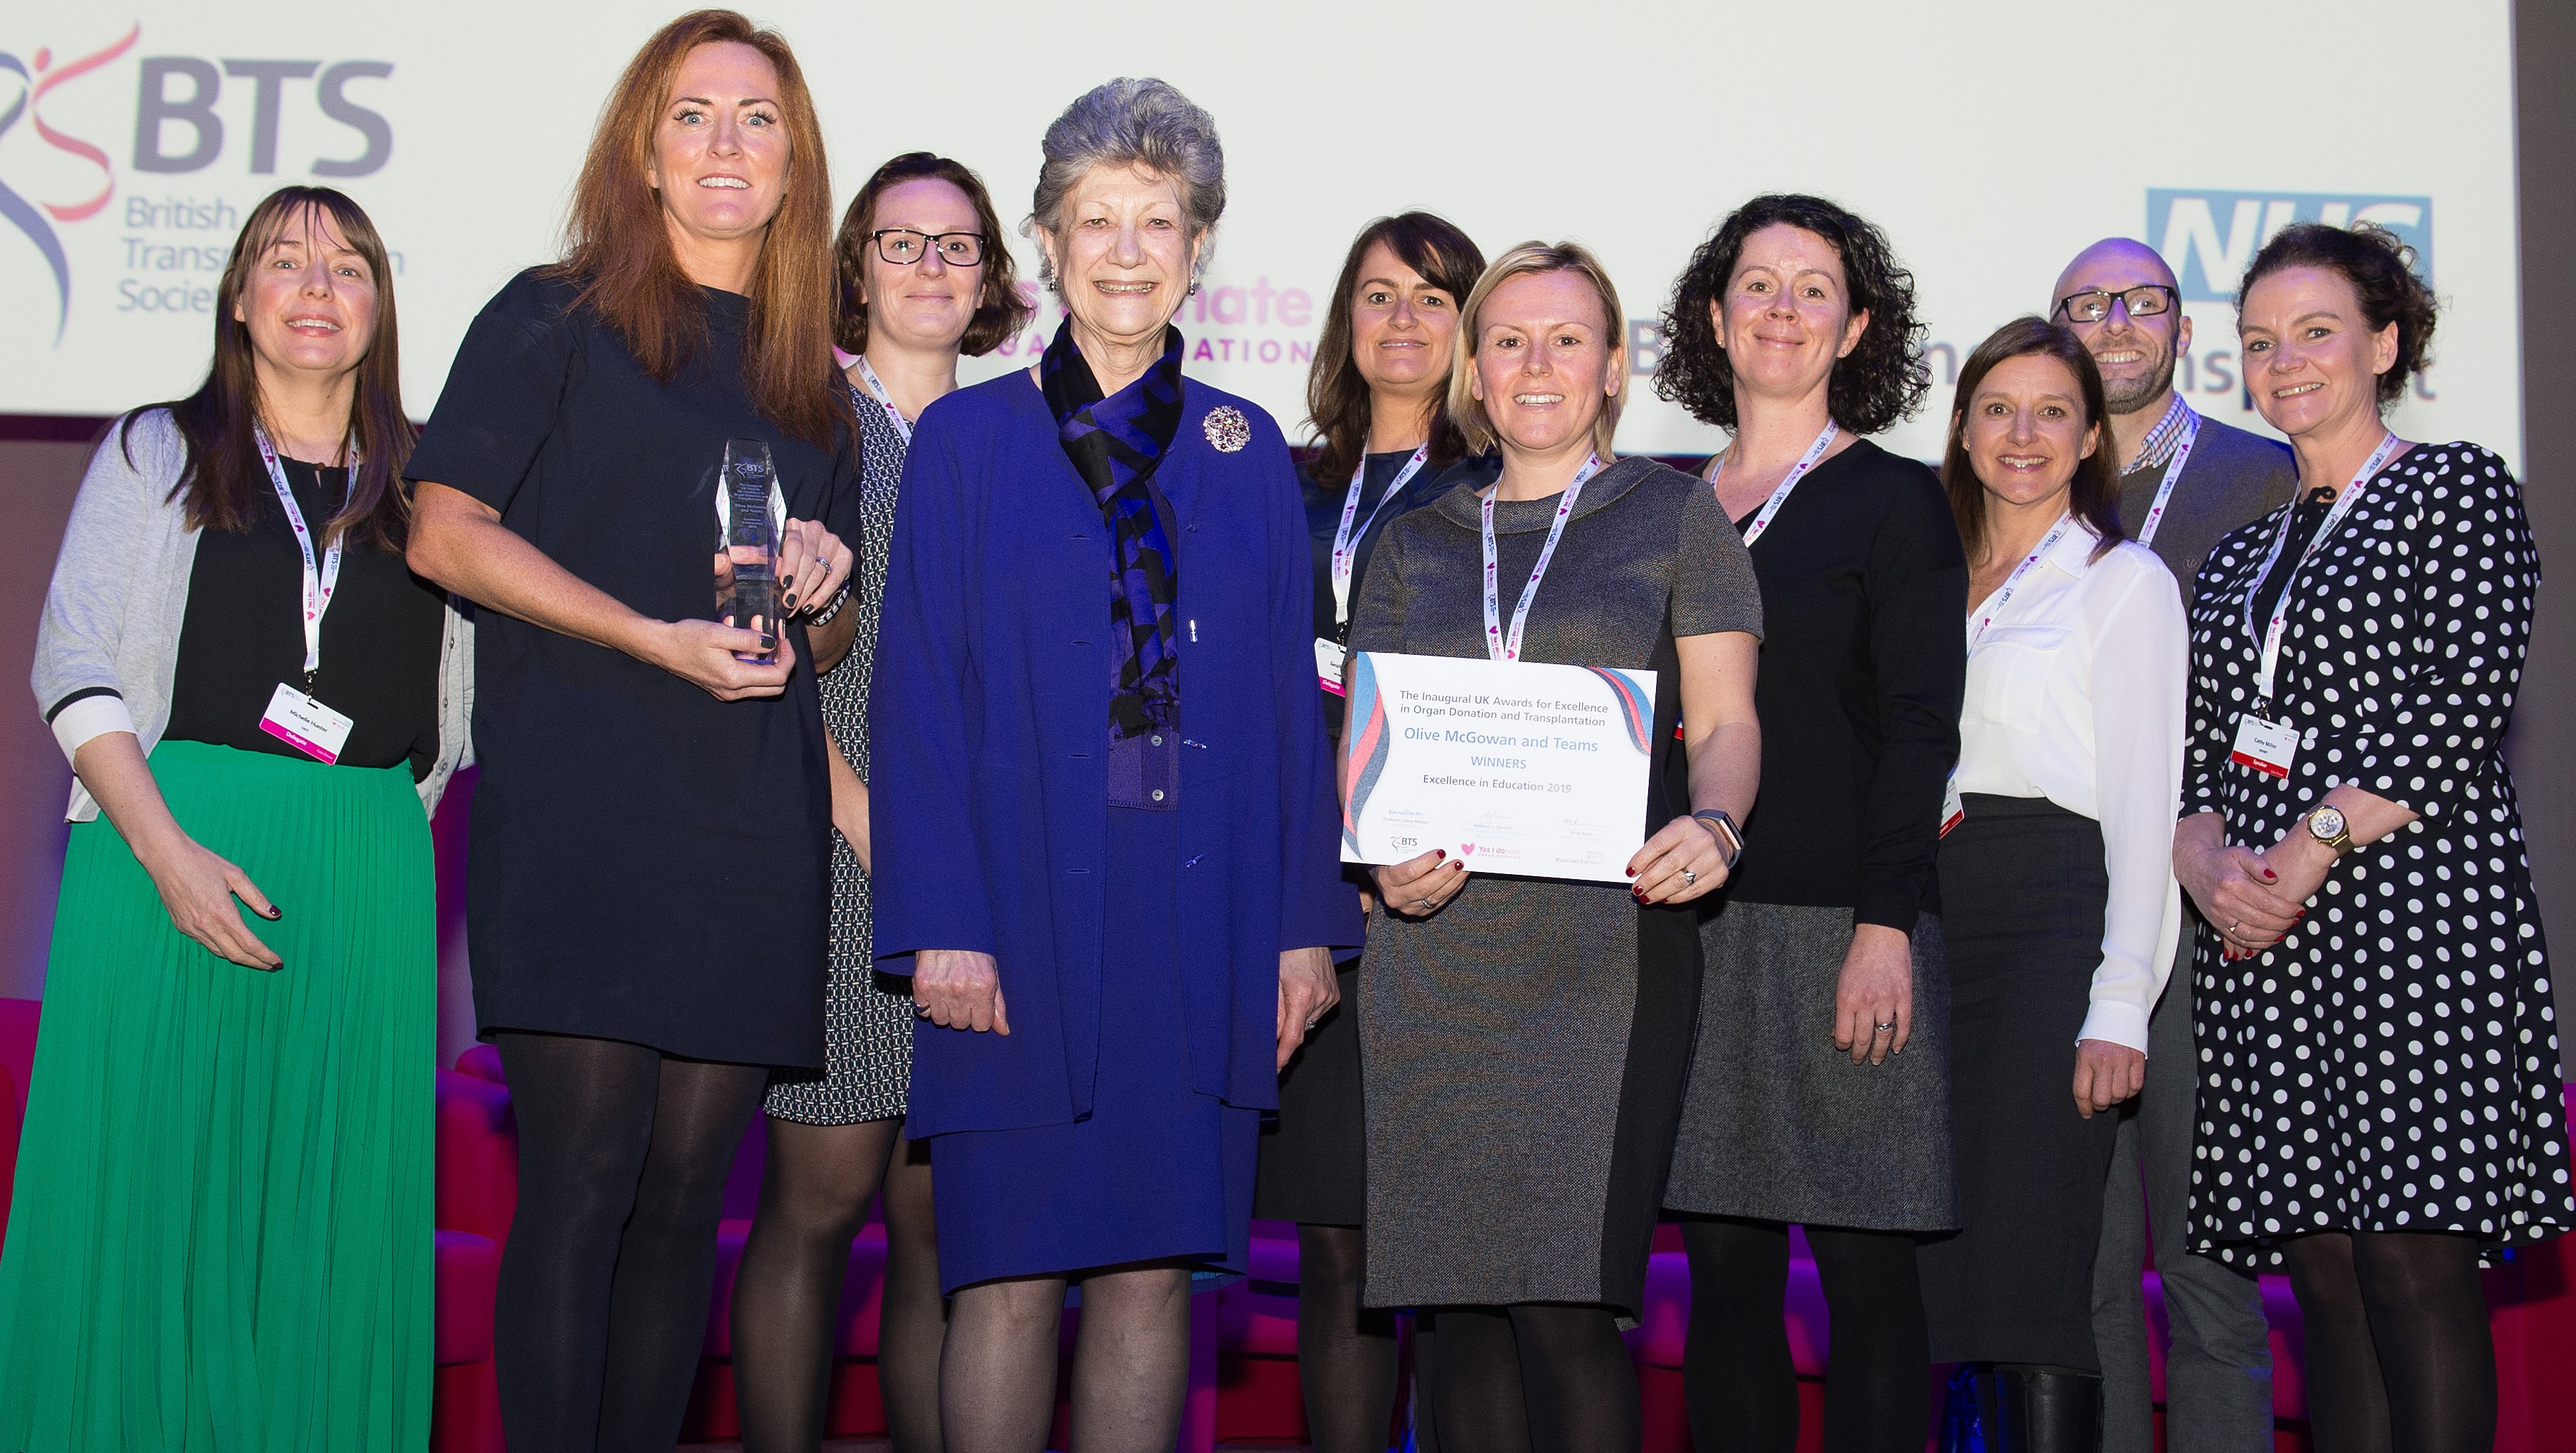 Olive McGowan and her team at NHS Blood and Transplant receiving the Excellence in Education award